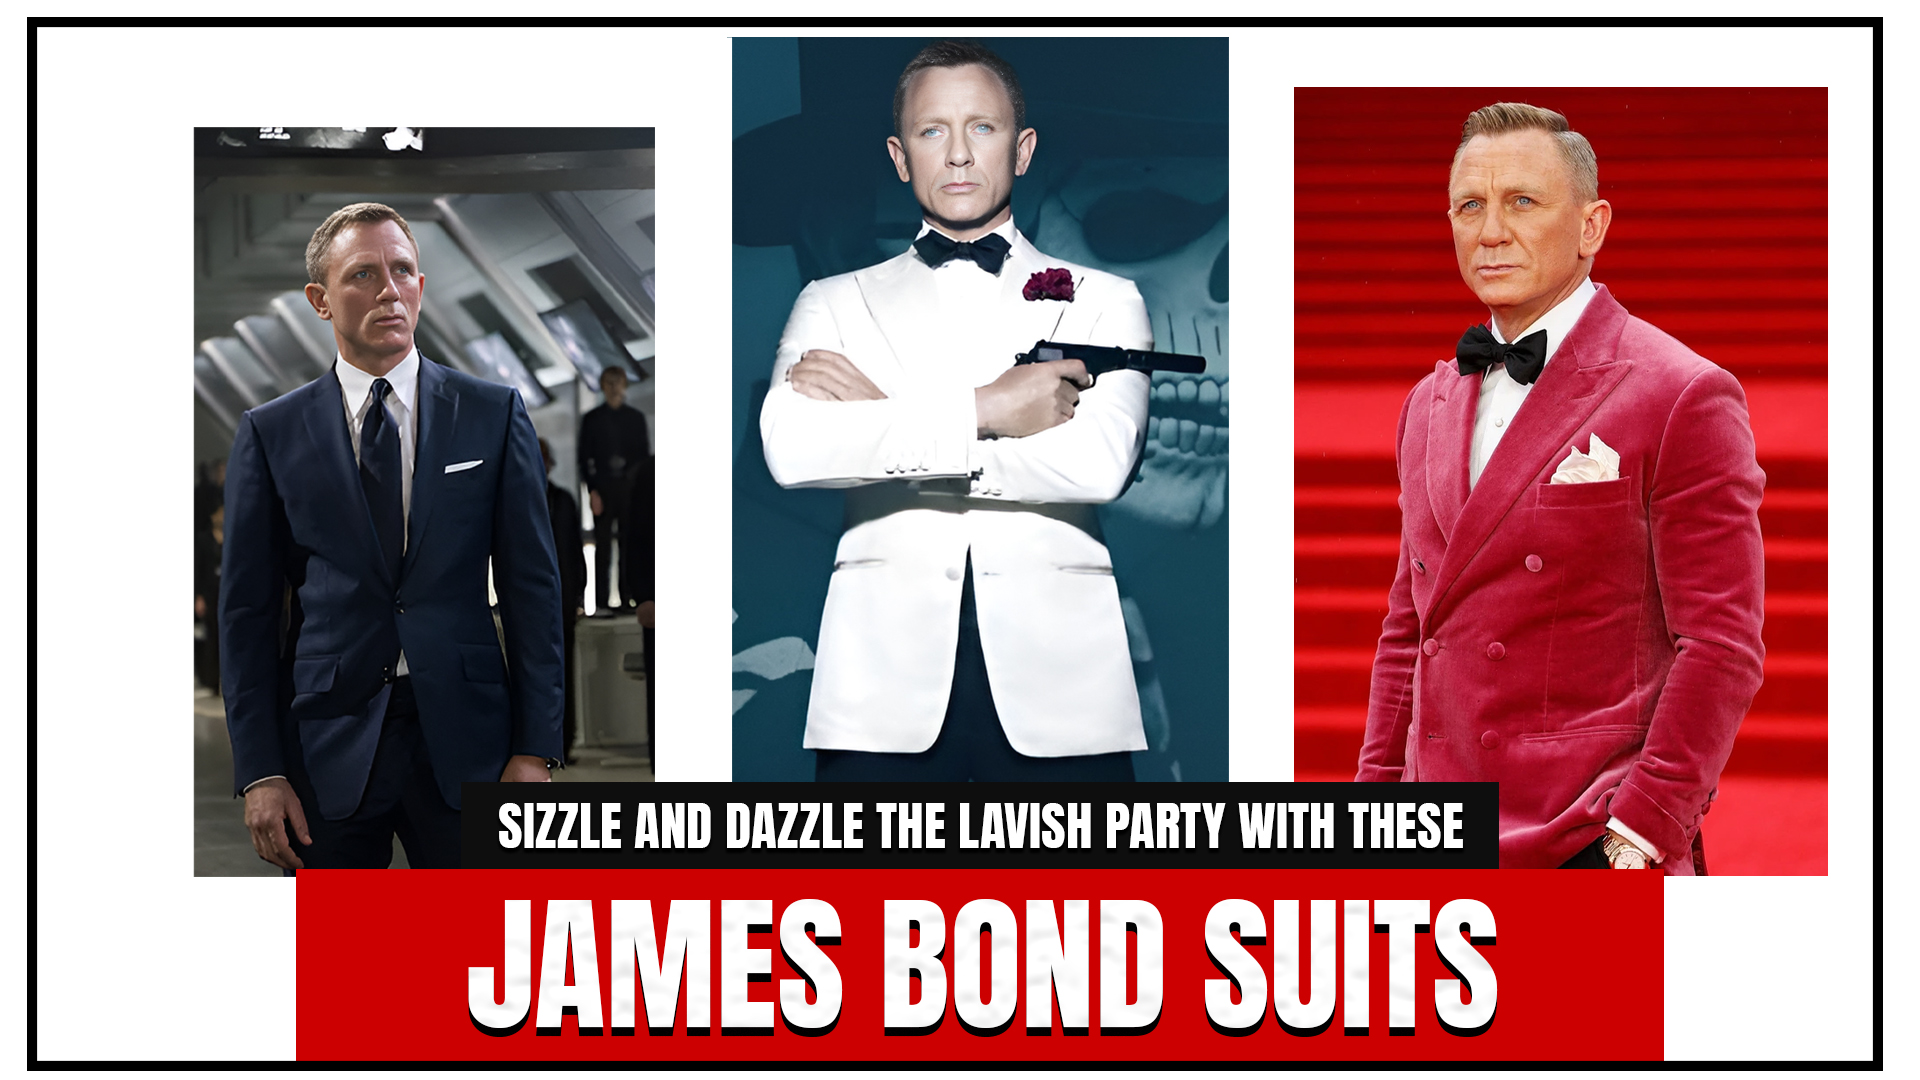 SIZZLE AND DAZZLE THE LAVISH PARTY WITH THESE JAMES BOND SUITS